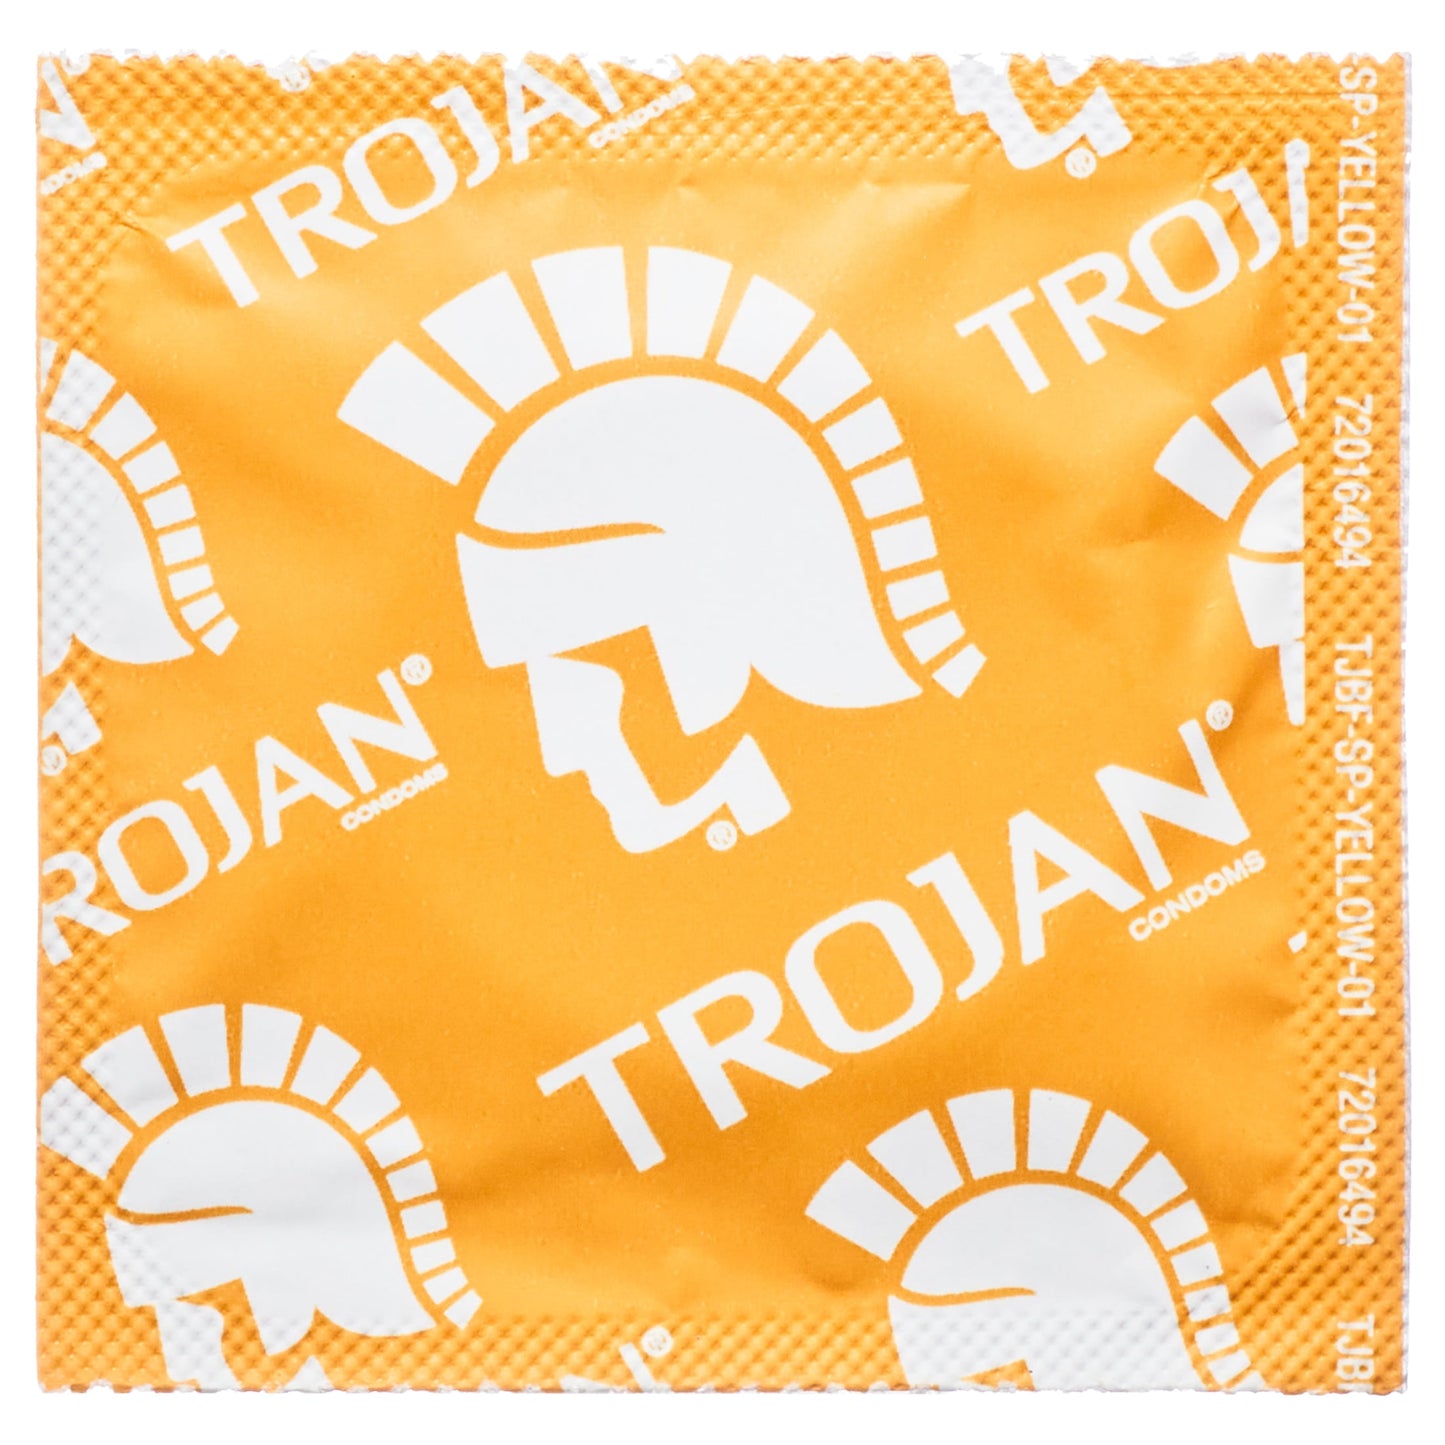 TROJAN Ultra Ribbed Lubricated Condoms for Ultra Stimulation, 36 Count, 1 Pack